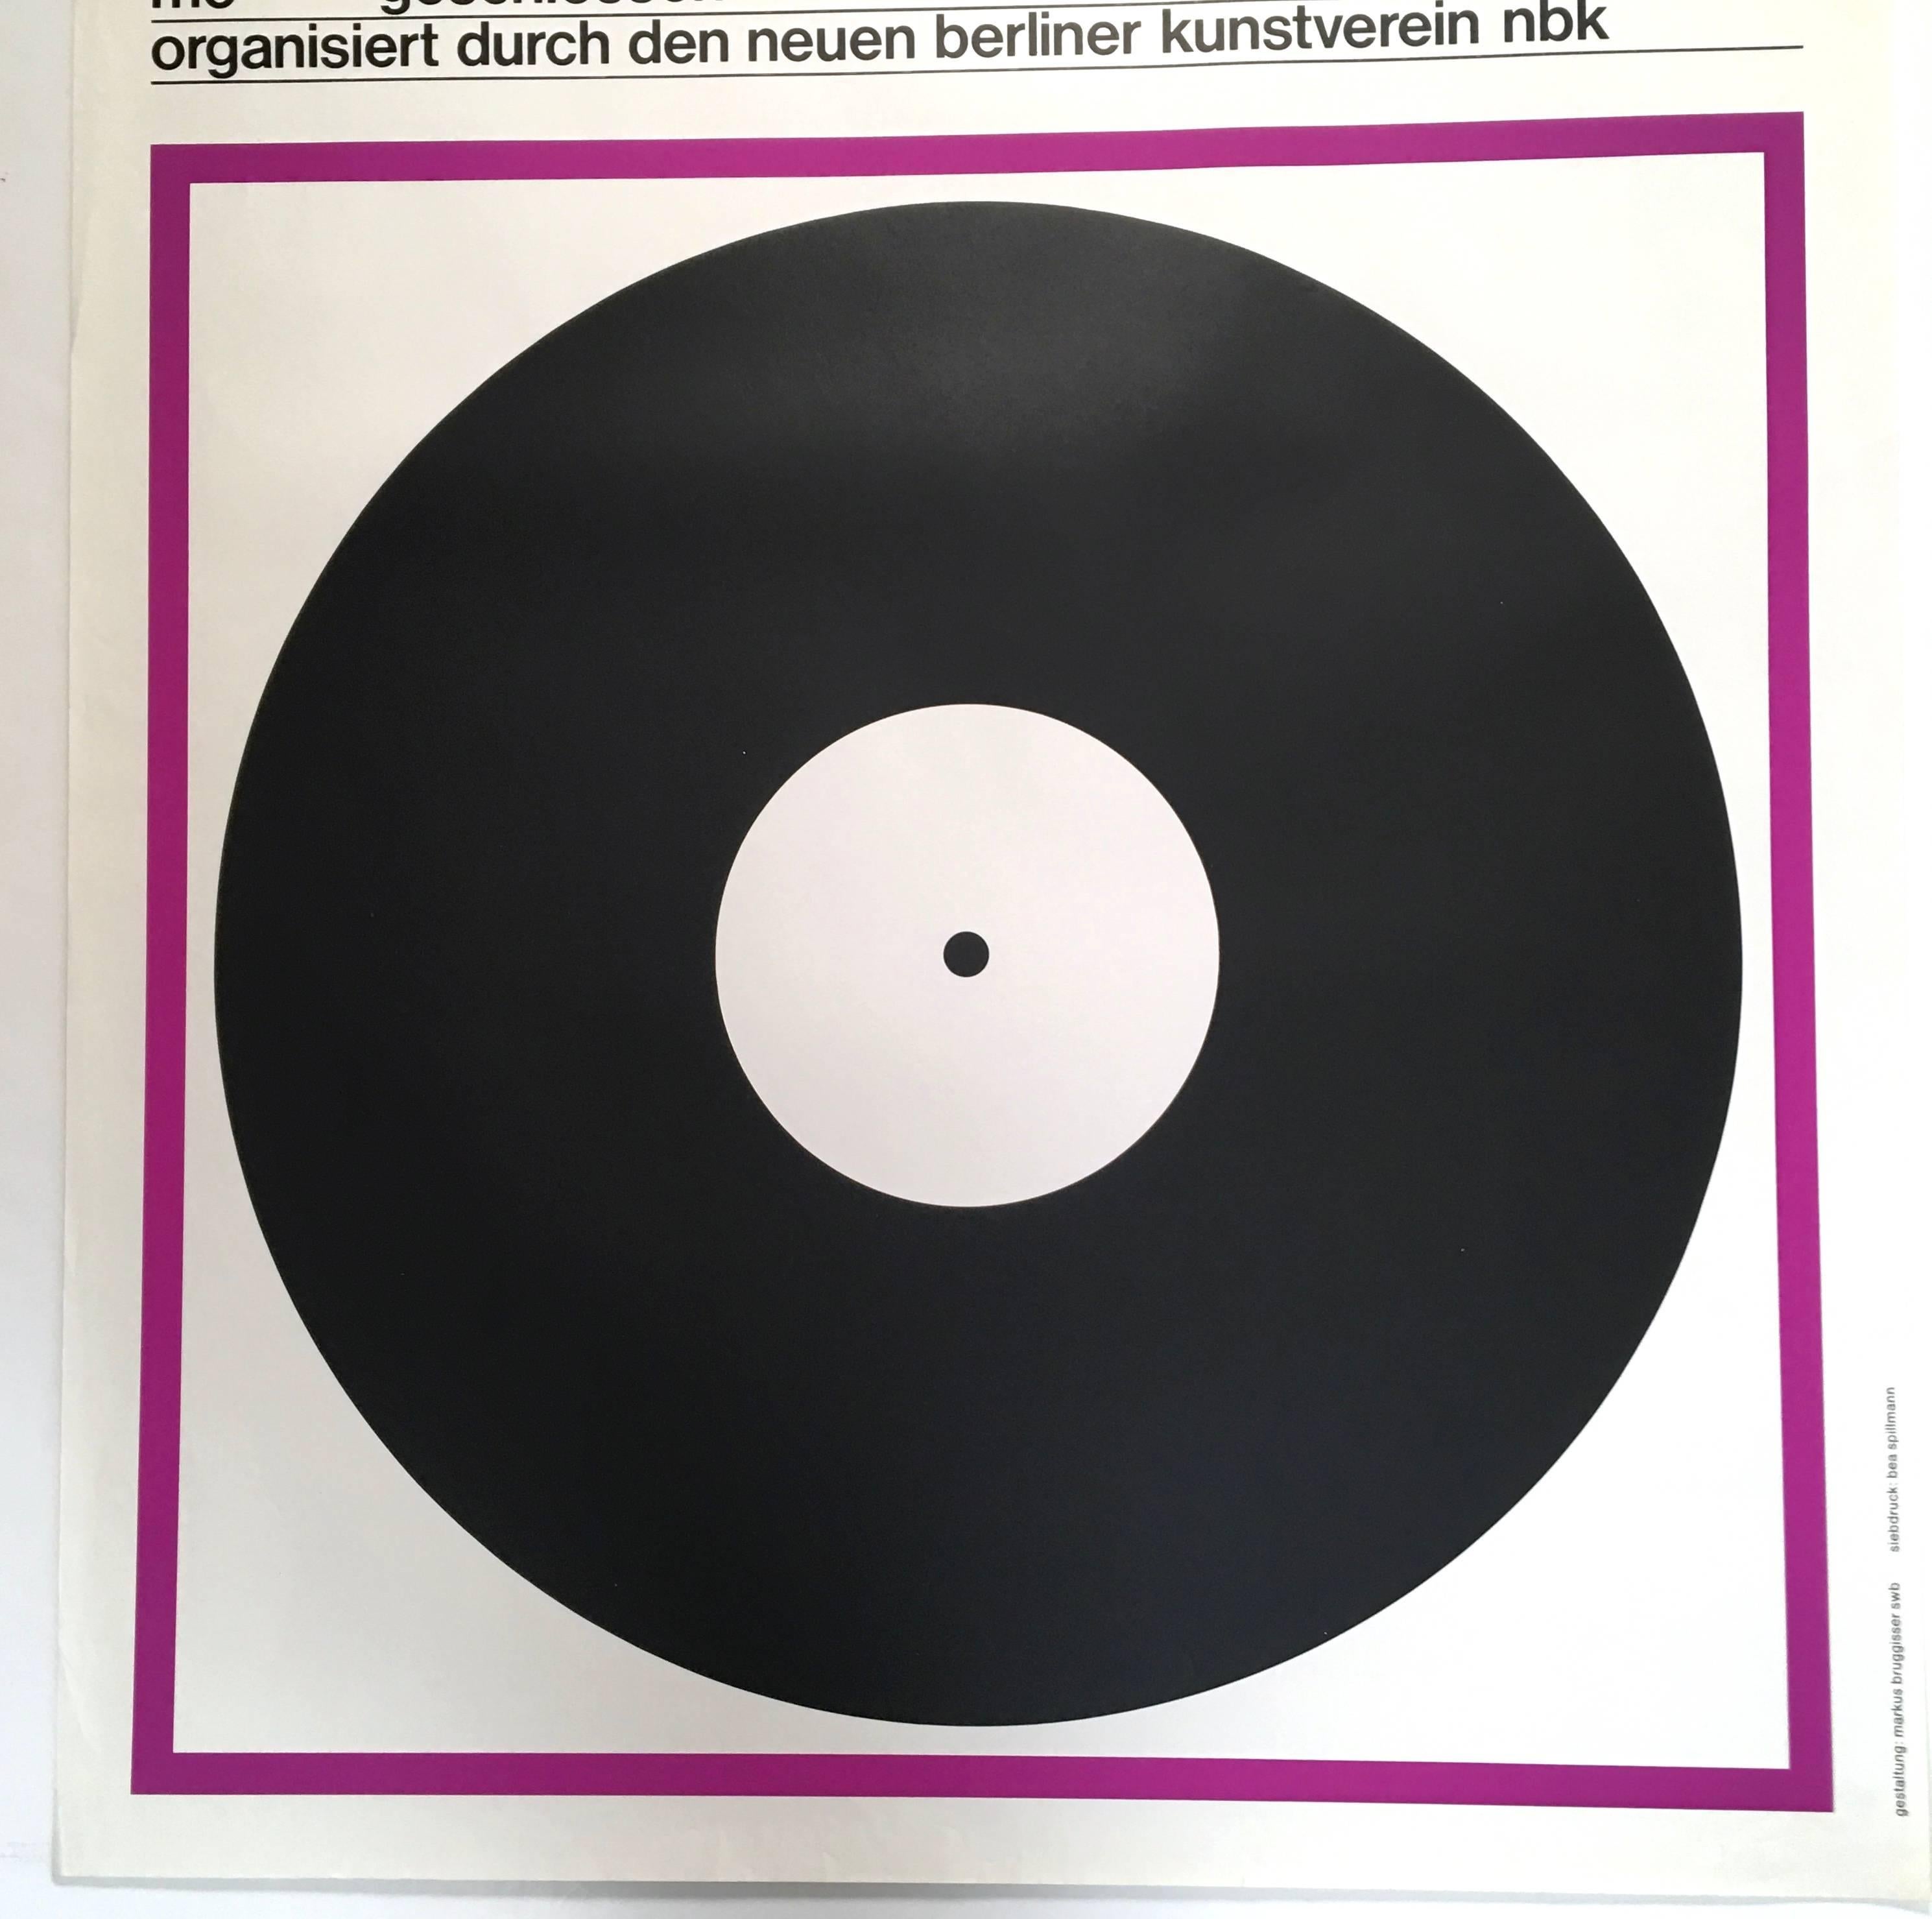 A Swiss museum poster for an exhibition of jazz and pop vinyl record album covers, featuring a graphic minimalist black circle with dot in the middle, representing a vinyl record, with Helvetica typeface and a purple border, designed by Markus